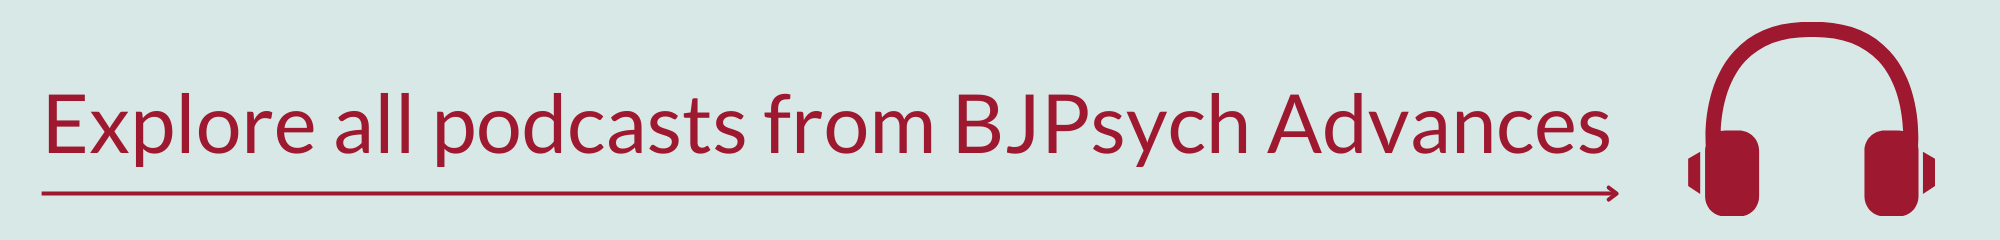 Explore all podcasts from BJPsych Advances